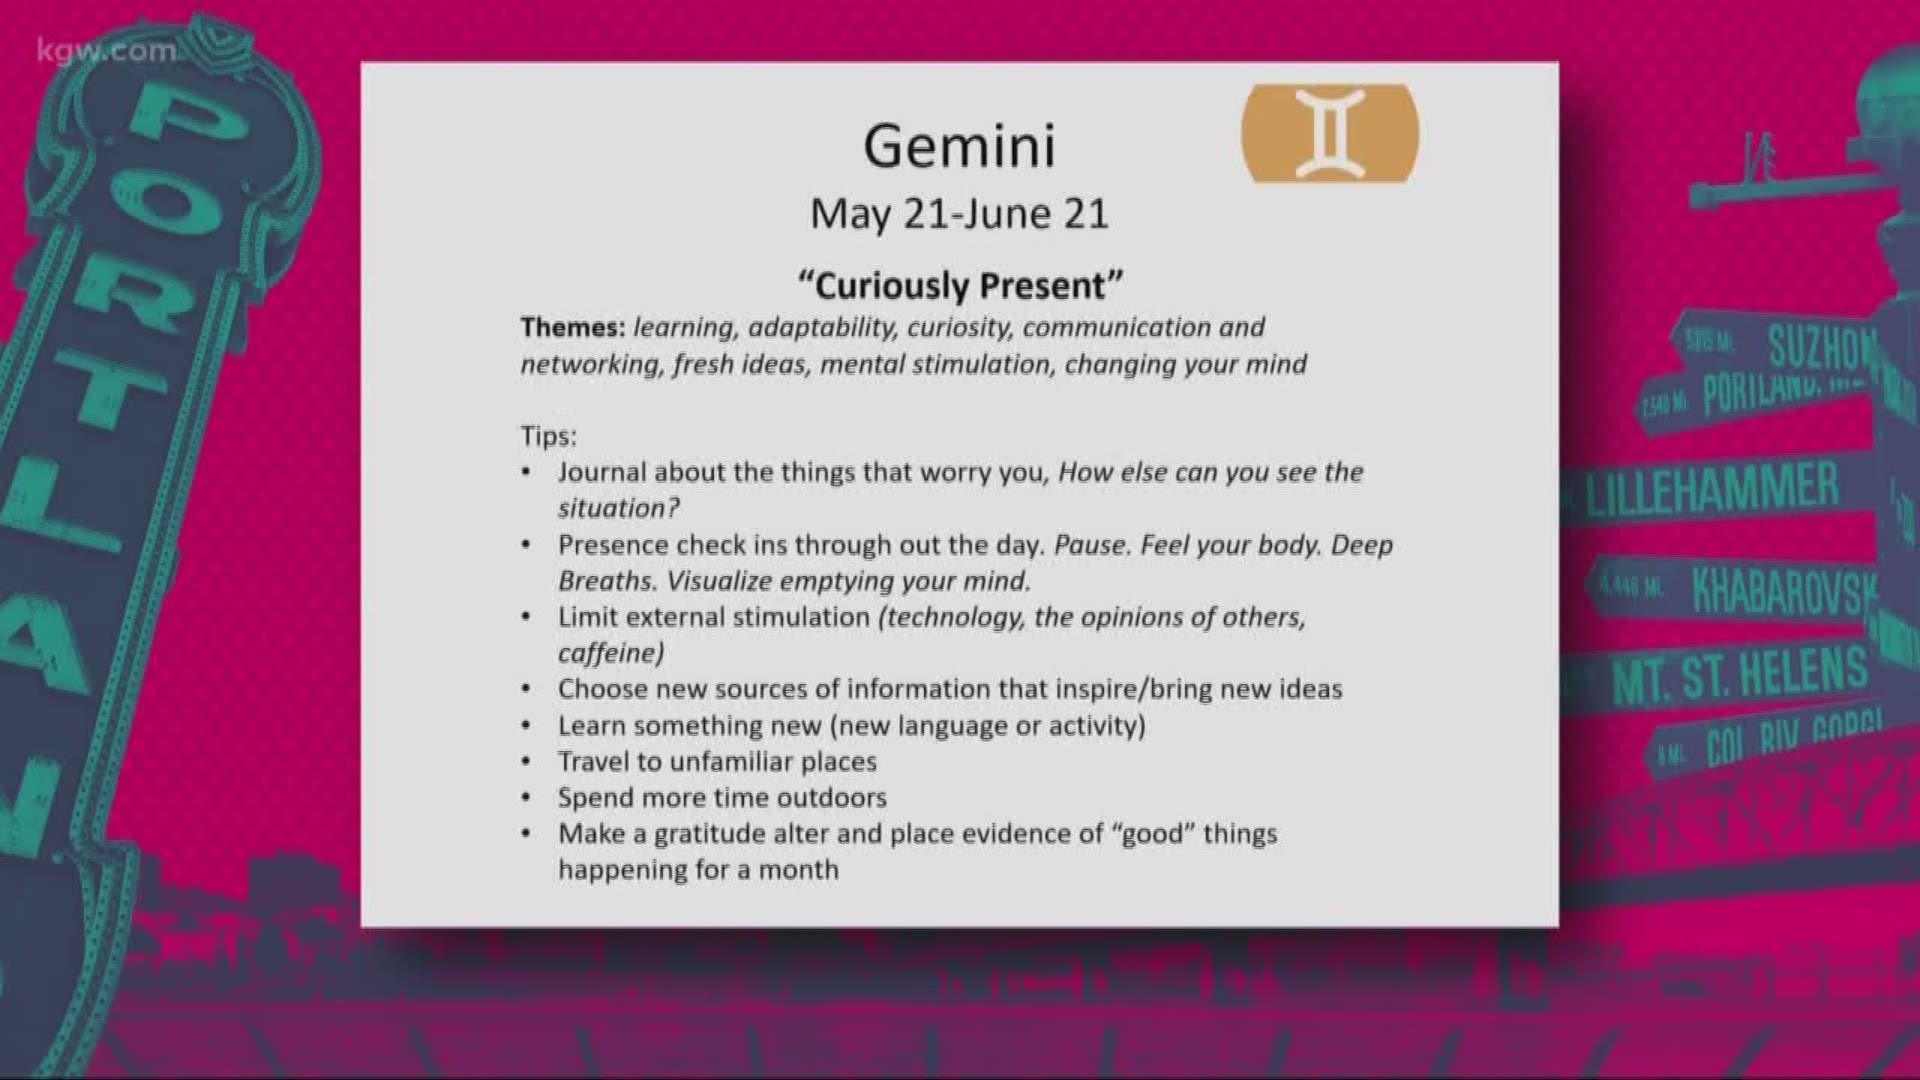 Gemini season is your time to be "curiously present."
jillcasepdx.com
#TonightwithCassidy